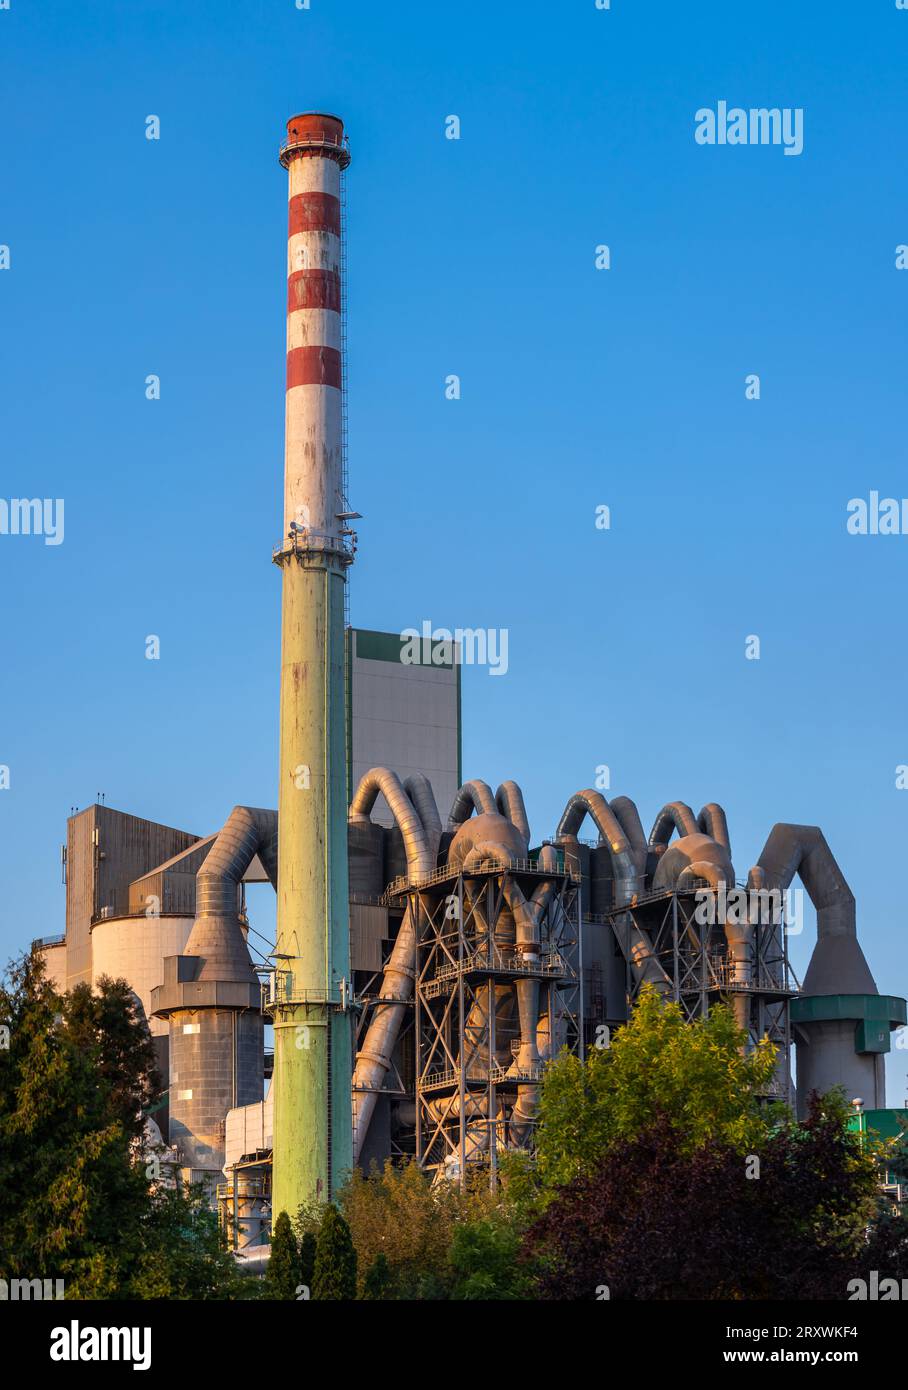 Cement plant - view of the external layout of the production line. Technology used in the production of building materials. Photo taken during the day Stock Photo